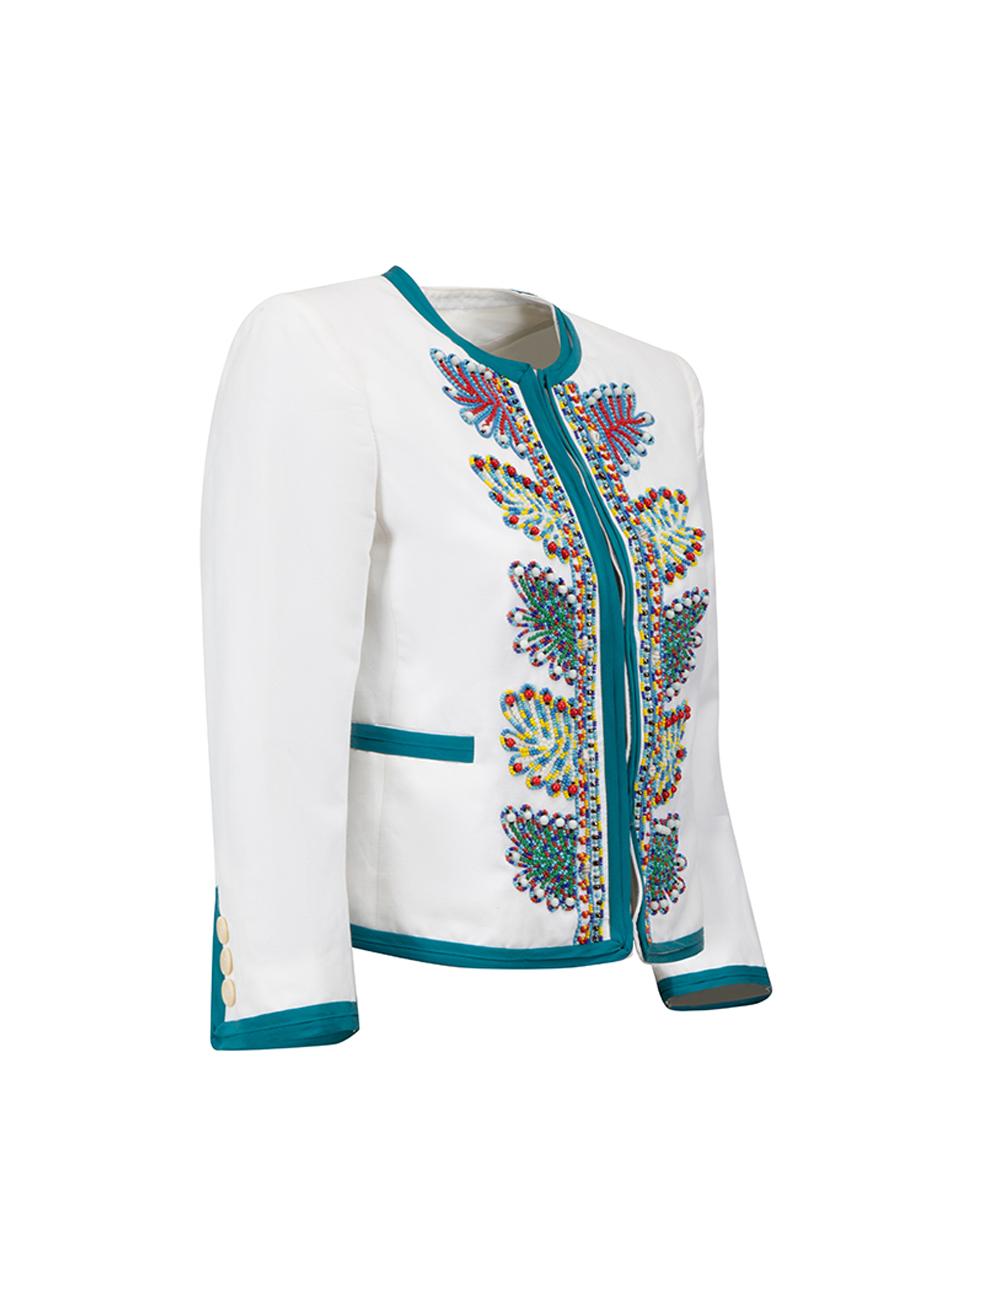 CONDITION is Very good. Minimal wear to jacket is evident. Minimal discolouration on cuffs and back of jacket on this used Moschino designer resale item.



Details


White

Synthetic

Cropped jacket

Beaded accent

Teal trimmings

Buttoned